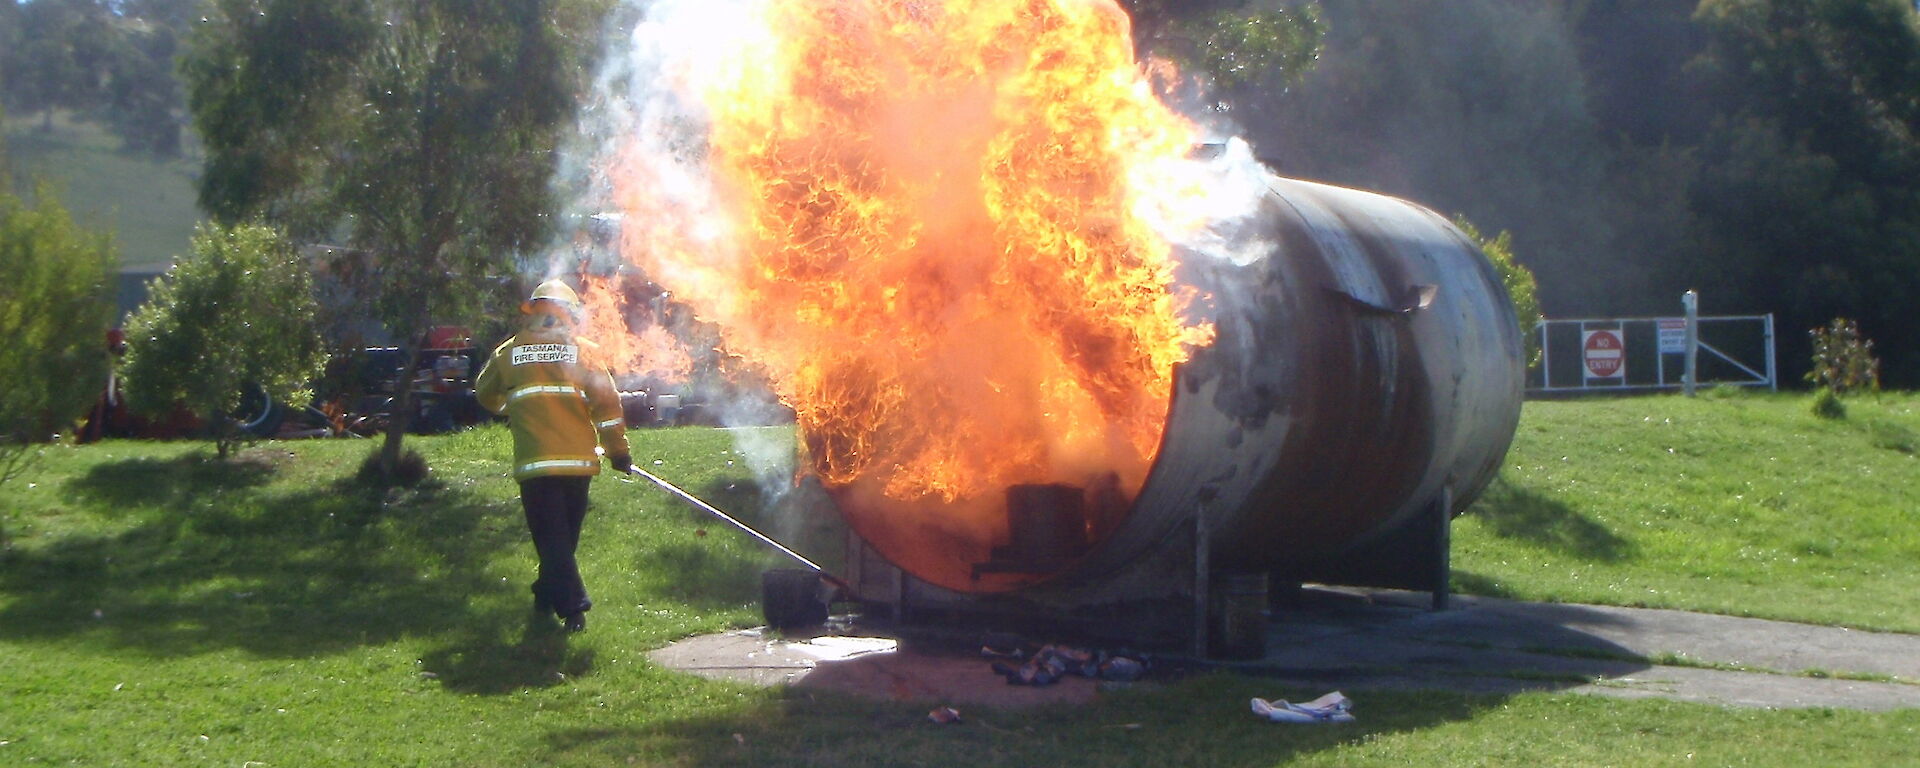 A large fire ball comes out of a gas tank during fire fighting training at Kingston